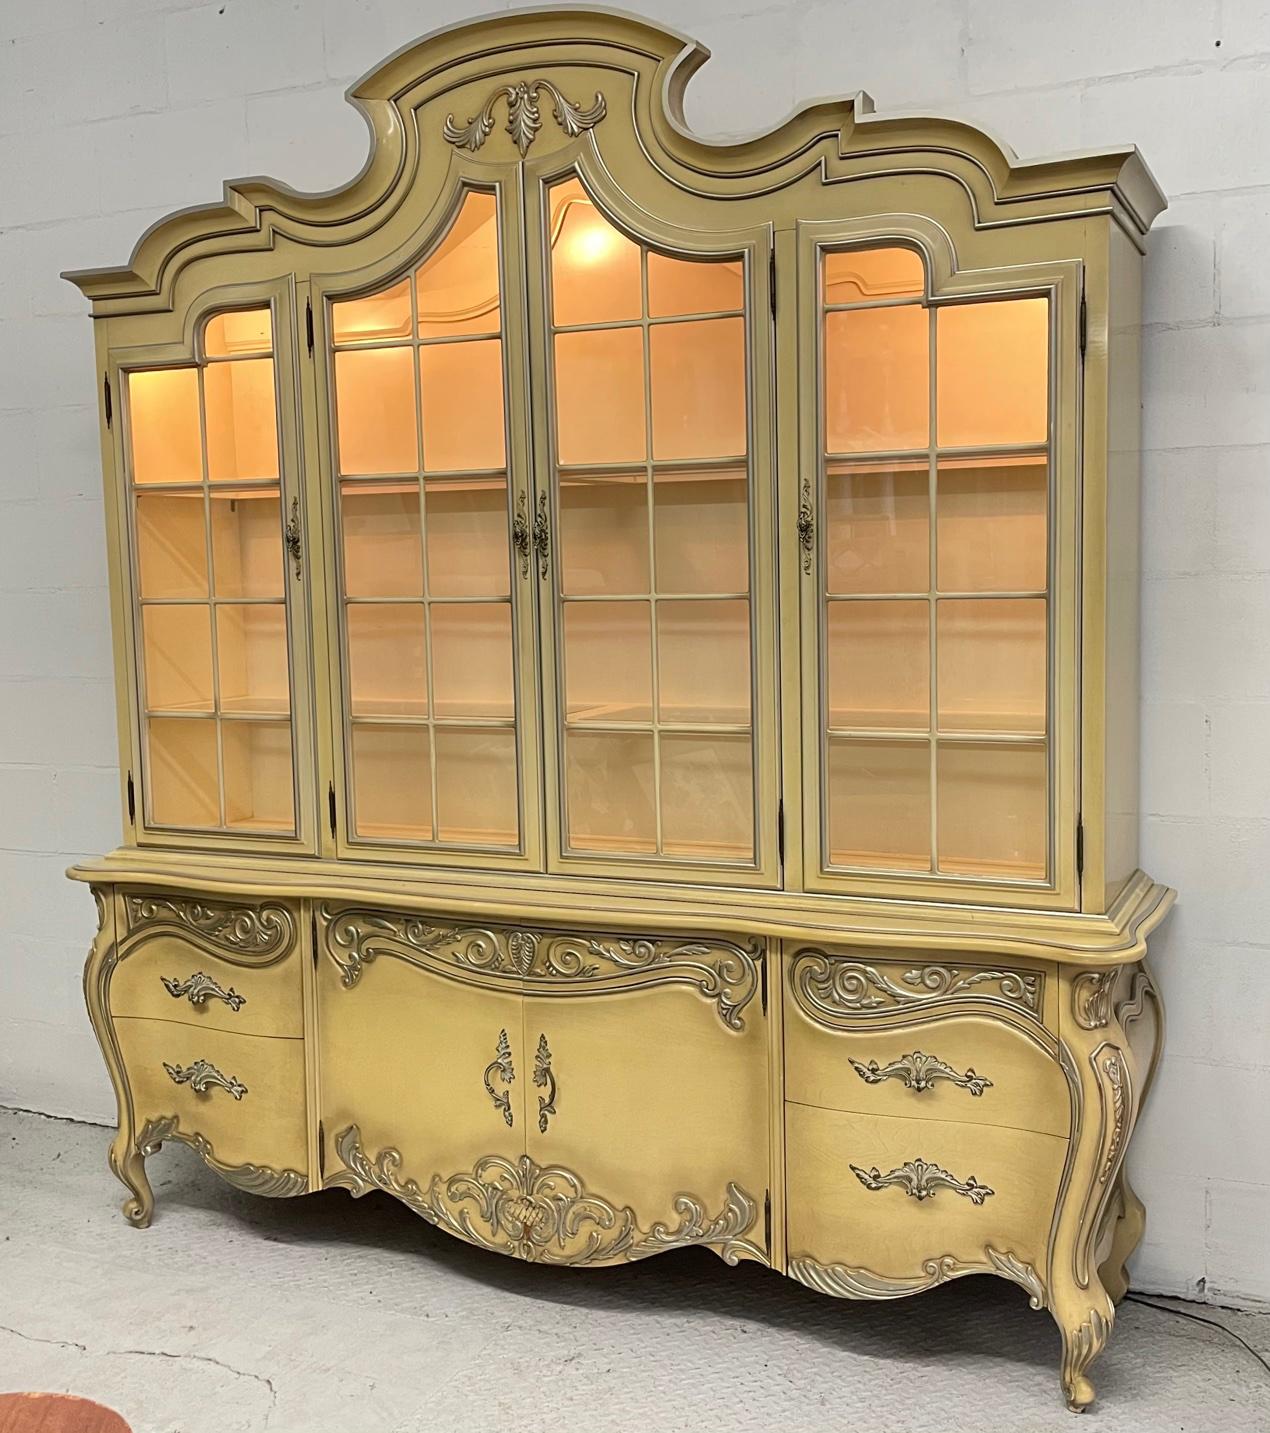 Large lighted dining cabinet by Romweber in ornate French Rococo style features lighted interior and onlays of cartouche design elements. Good condition with imperfections consistent with age, see photos for condition details.
For a shipping quote